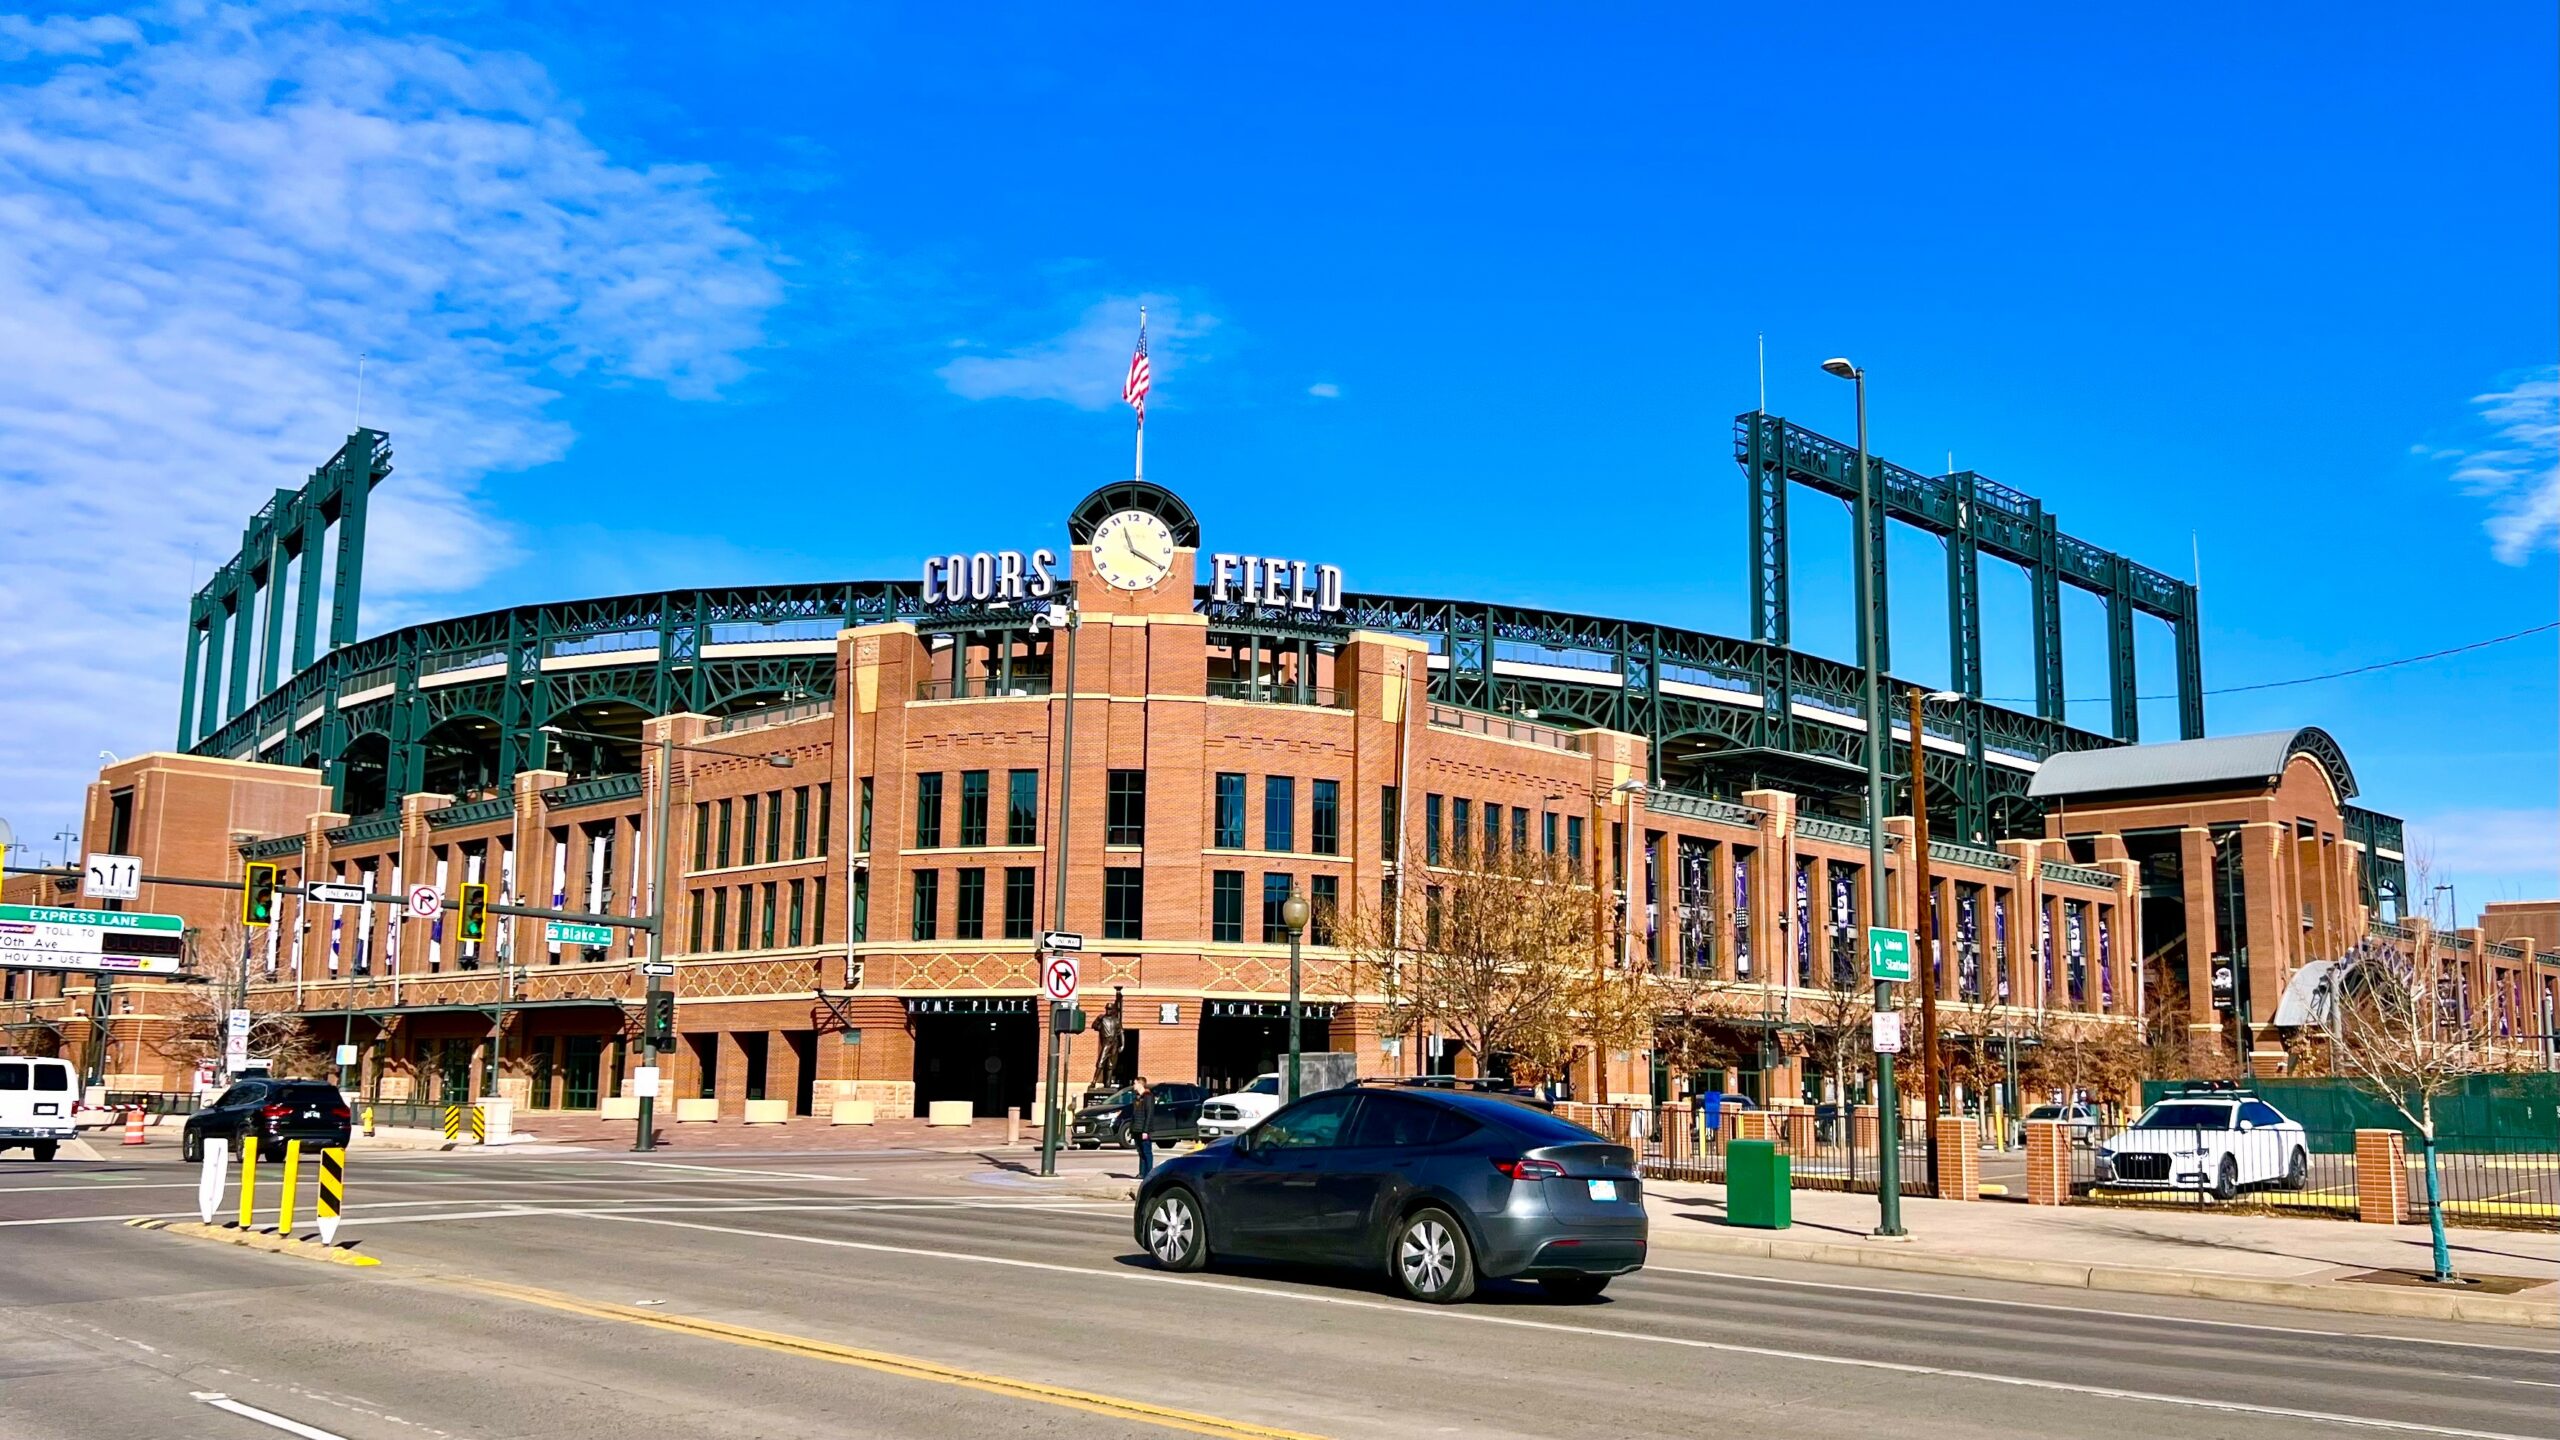 Coors field private transportation